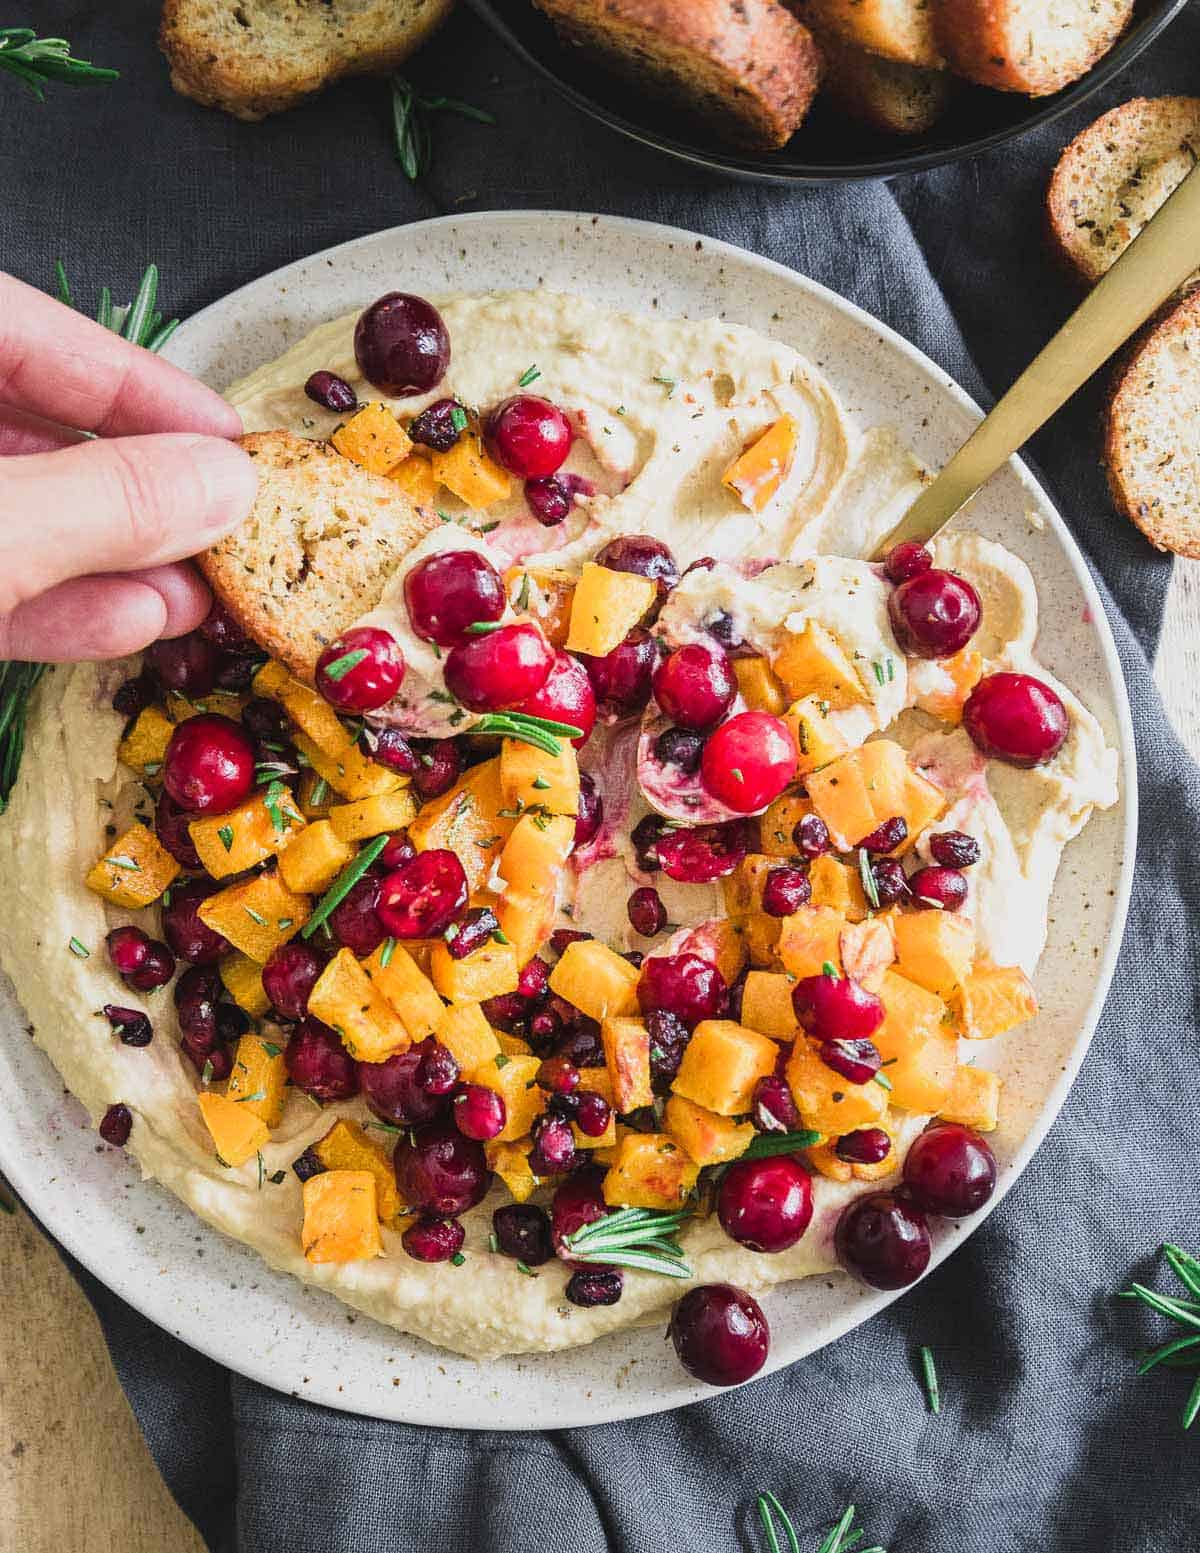 Serve this holiday butternut squash hummus with your favorite bread crisps, pita chips or even raw veggies for an impressive seasonal appetizer. 